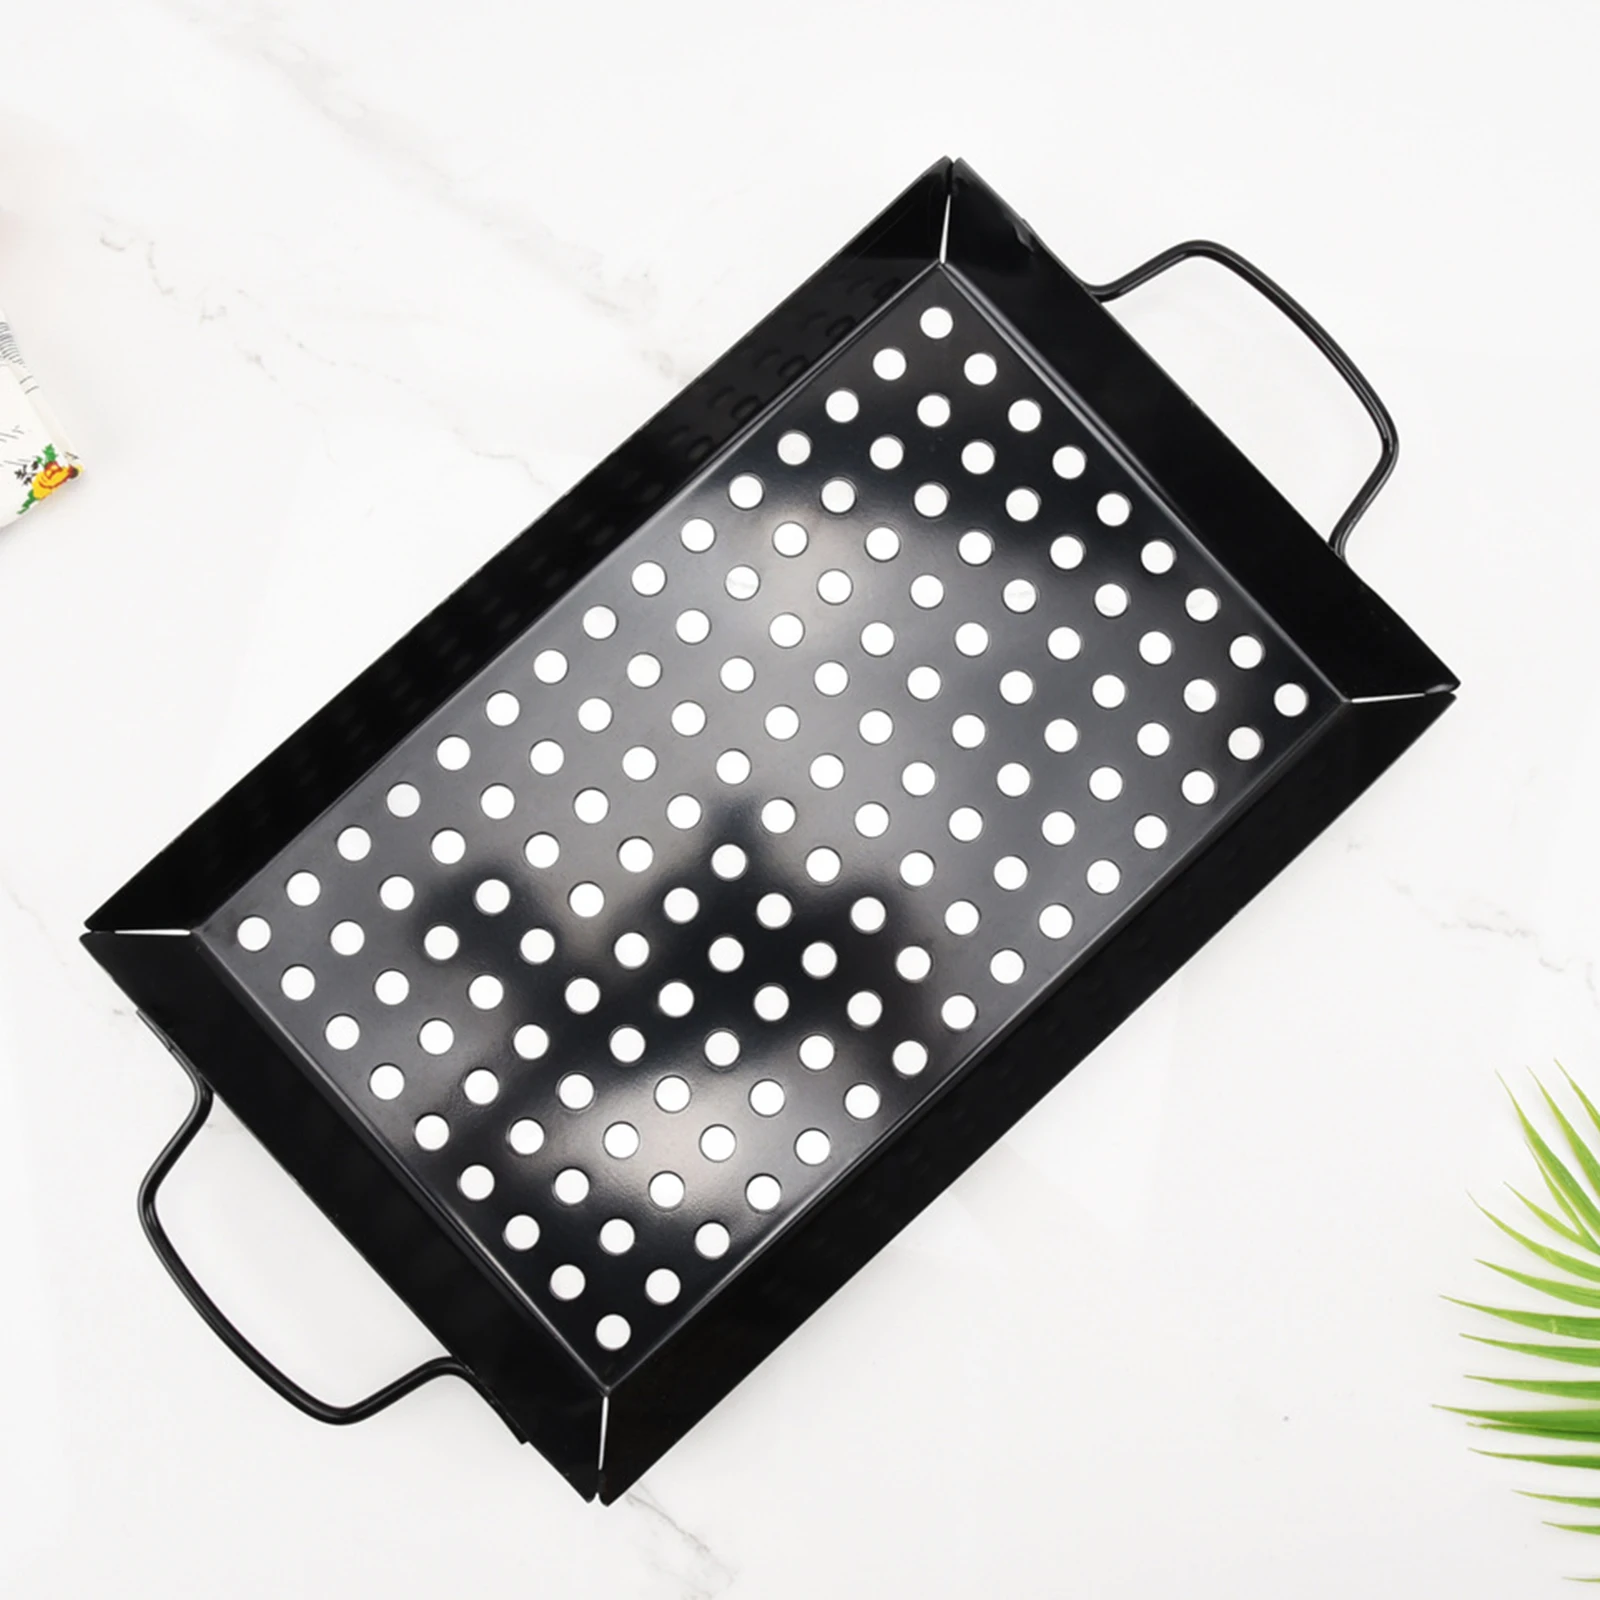 Large BBQ Tray Metal Barbecue Wok Pan Black Meat Vegetable Grill Tray